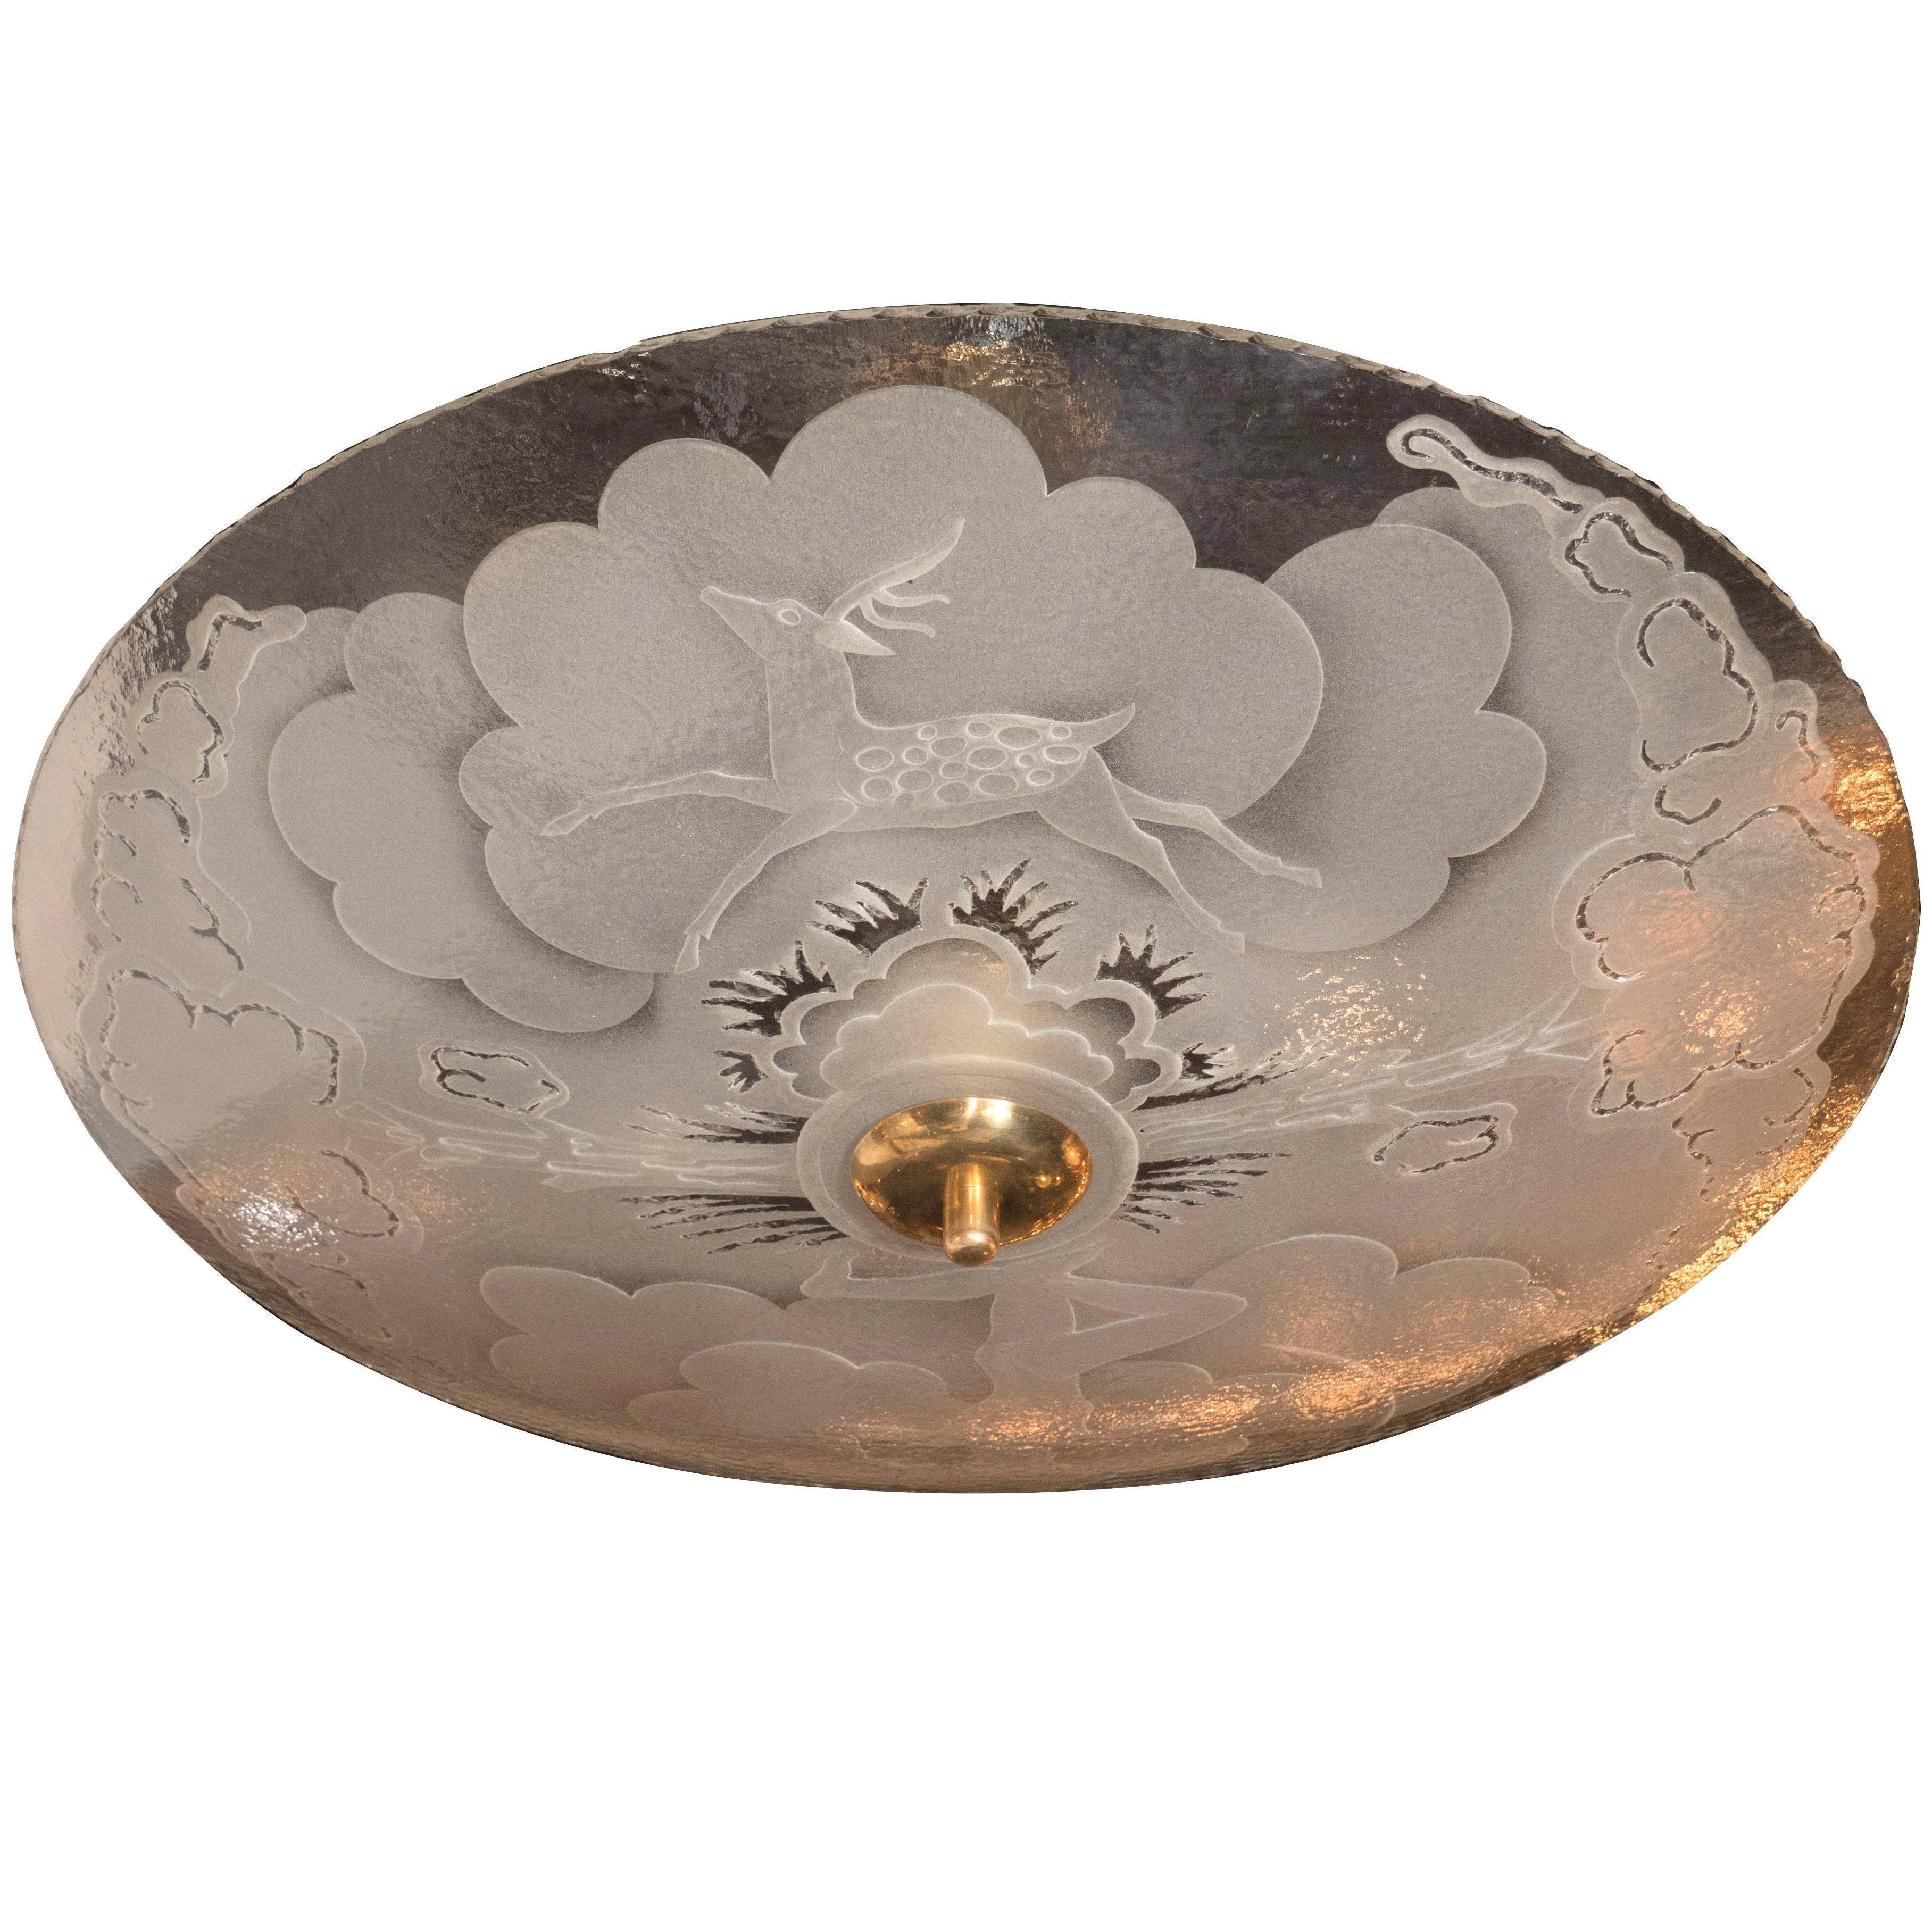 This stunning frosted glass ceiling mount depicts a classical hunting scene. A nude male figure appears poised with a bow, moments after releasing an arrow. On the opposite side, a young spotted buck prances. Stylized Art Deco Cloud and foliage